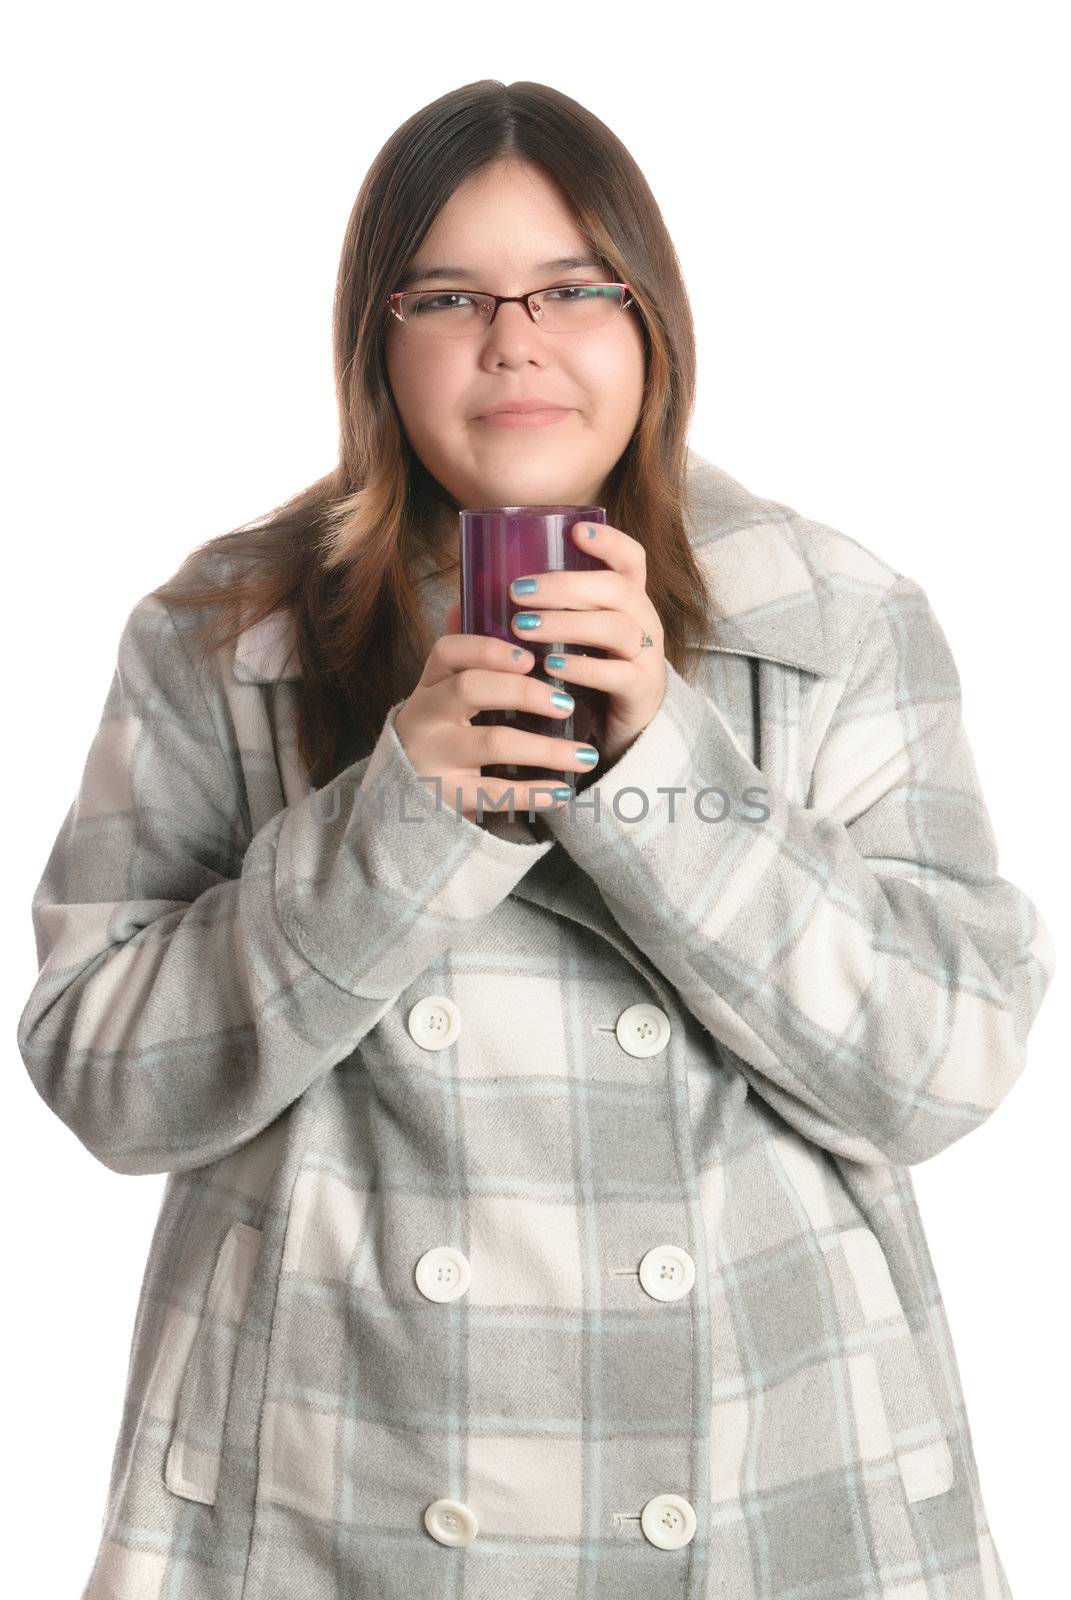 A smiling teenage girl is wearing a fall coat while holding a glass full of juice, isolated against a white background.